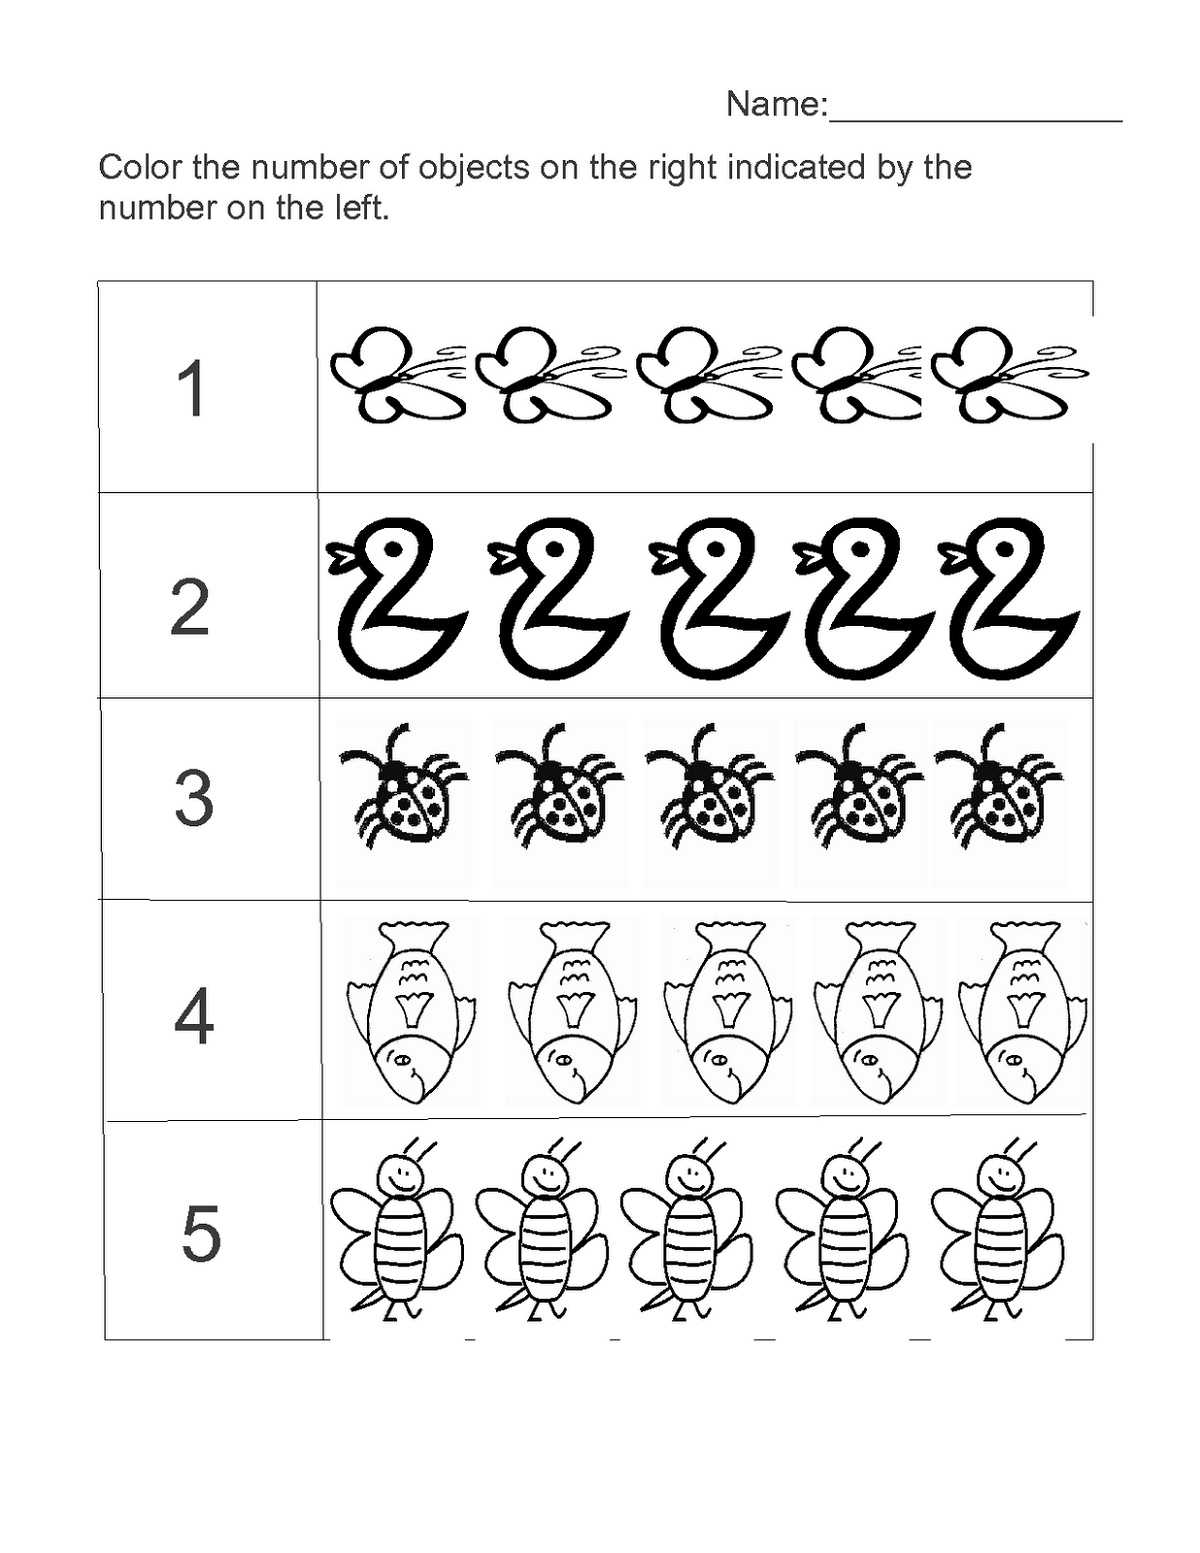 Coloring Worksheets For Kindergarten Count And Color